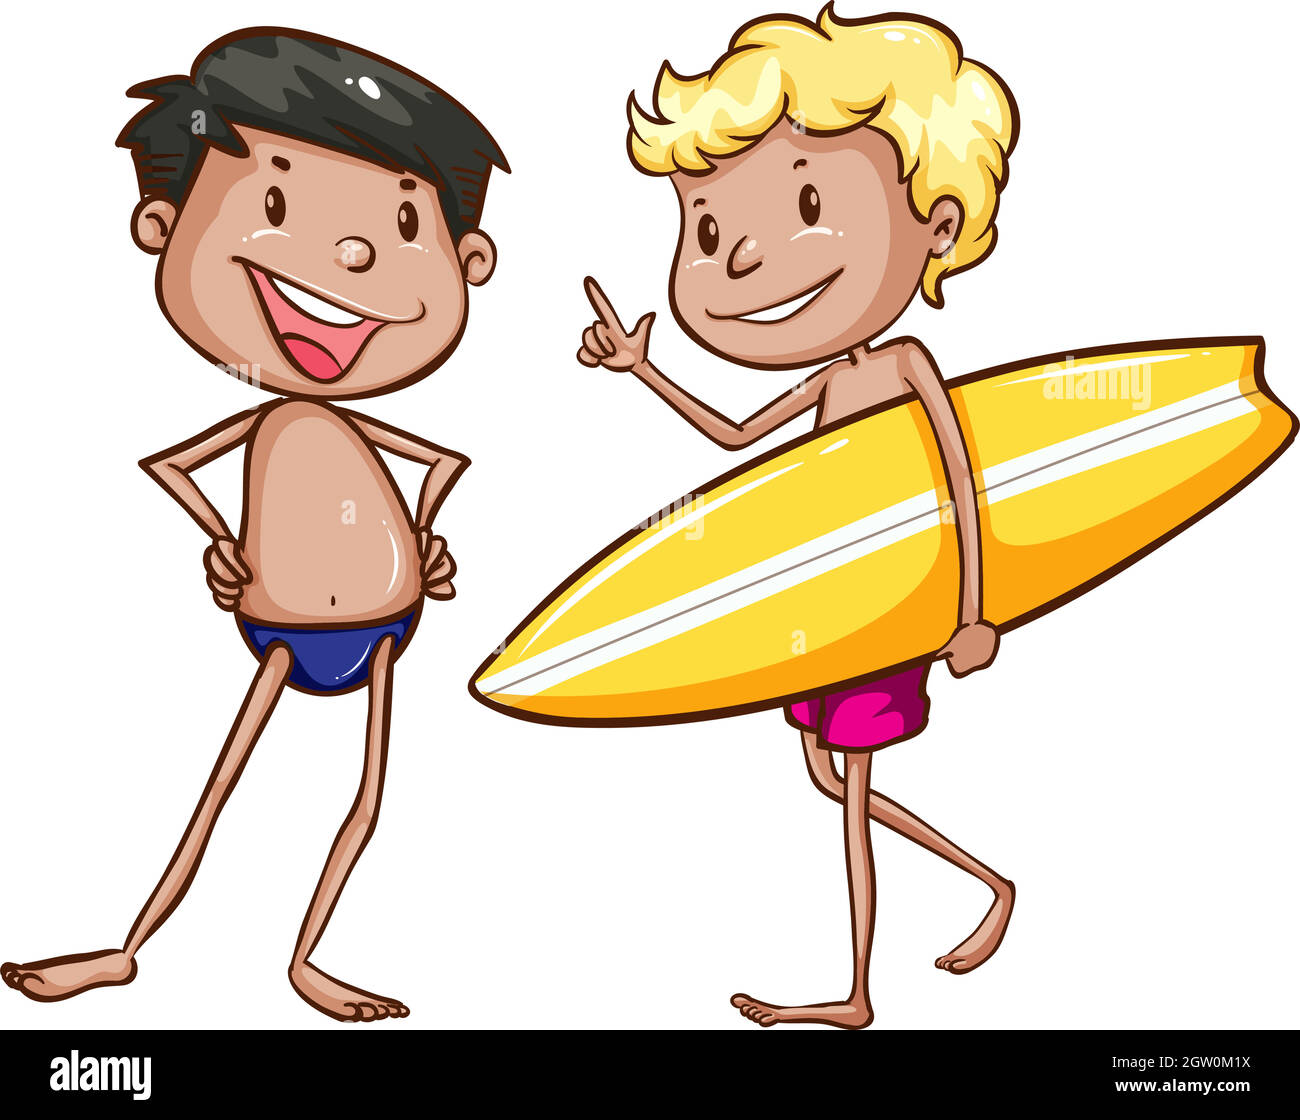 Simple sketches of the men going to the beach Stock Vector